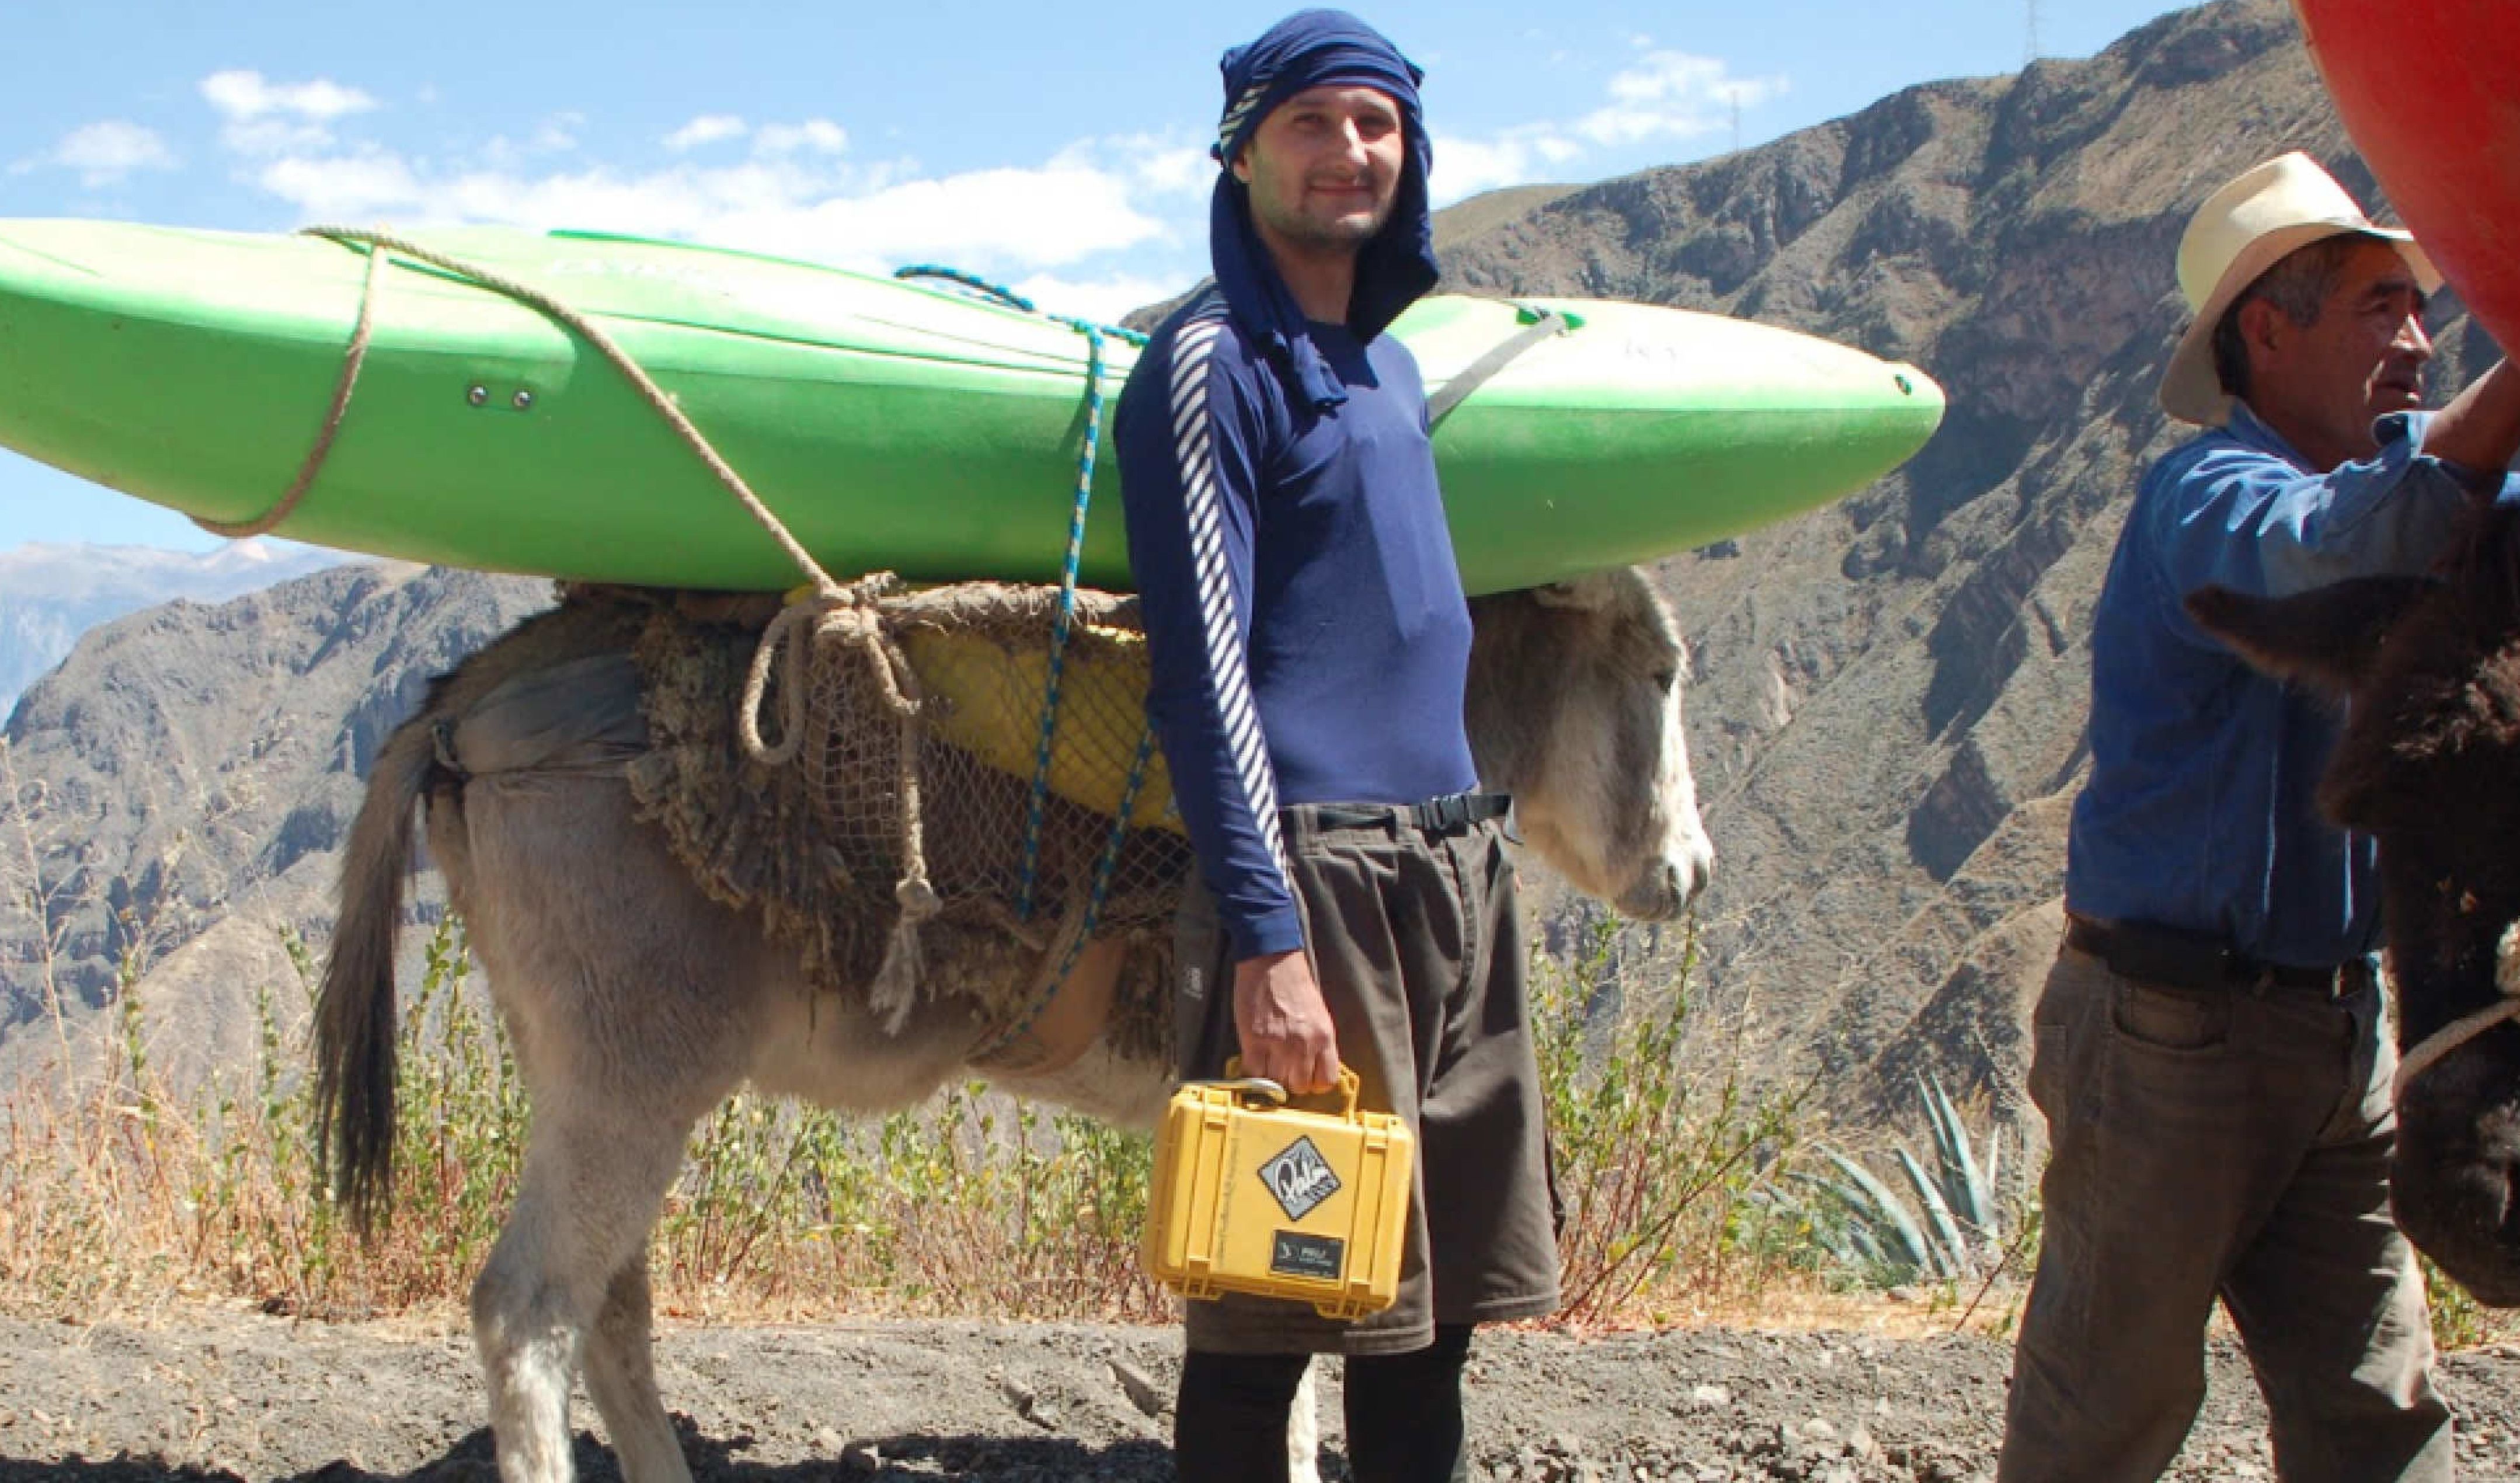 student with kayak on mule in background